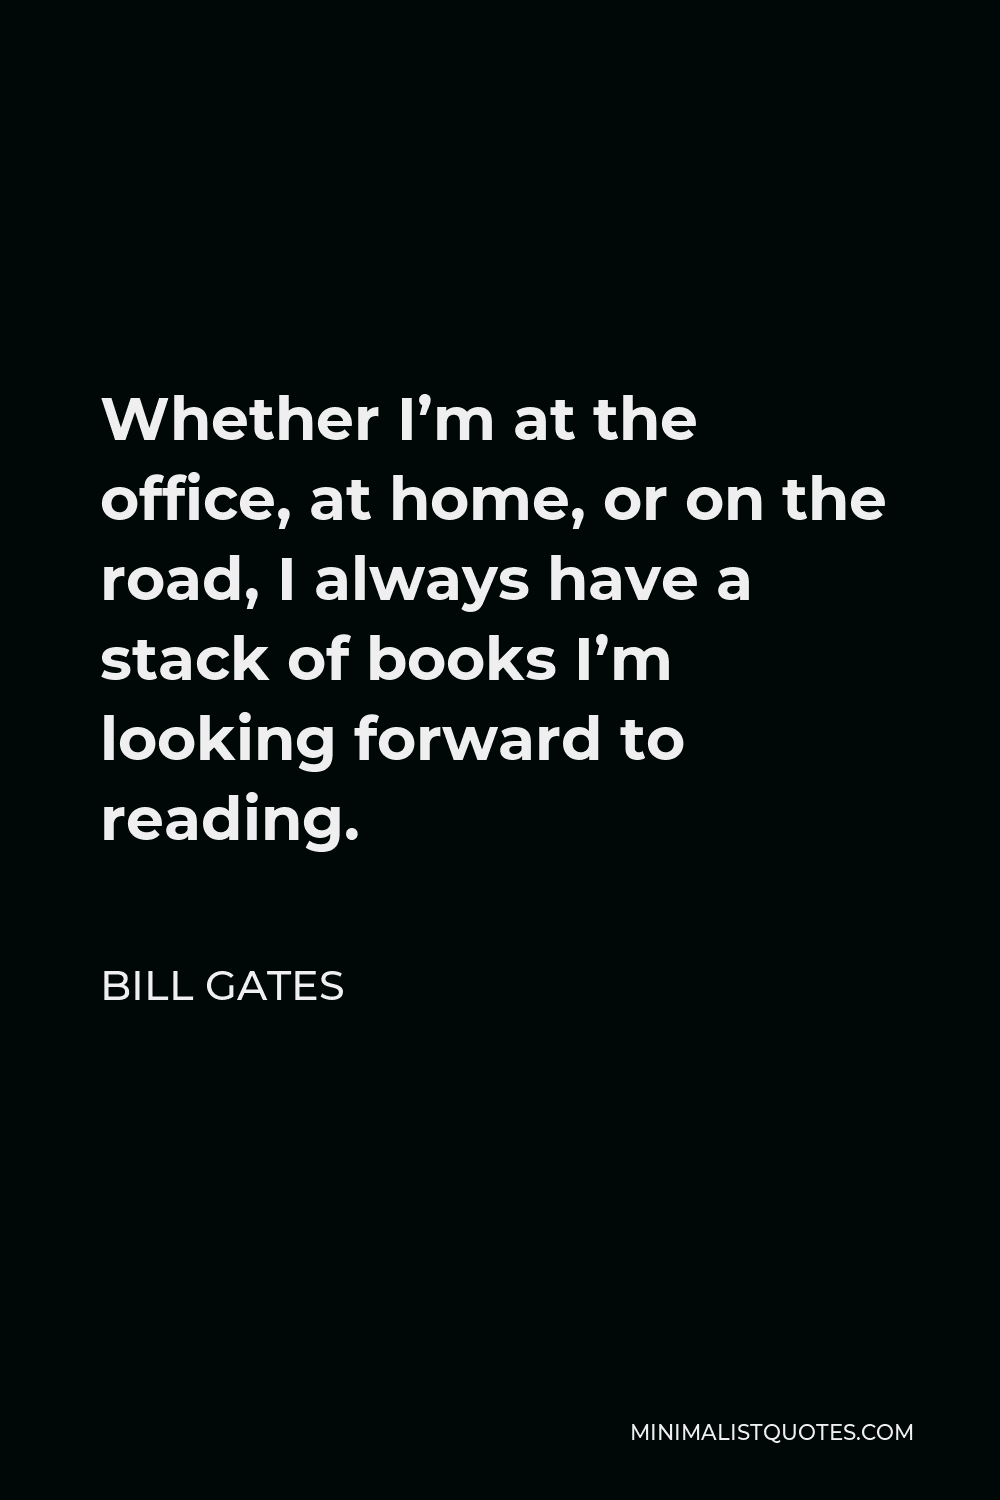 Bill Gates Quote - Whether I’m at the office, at home, or on the road, I always have a stack of books I’m looking forward to reading.